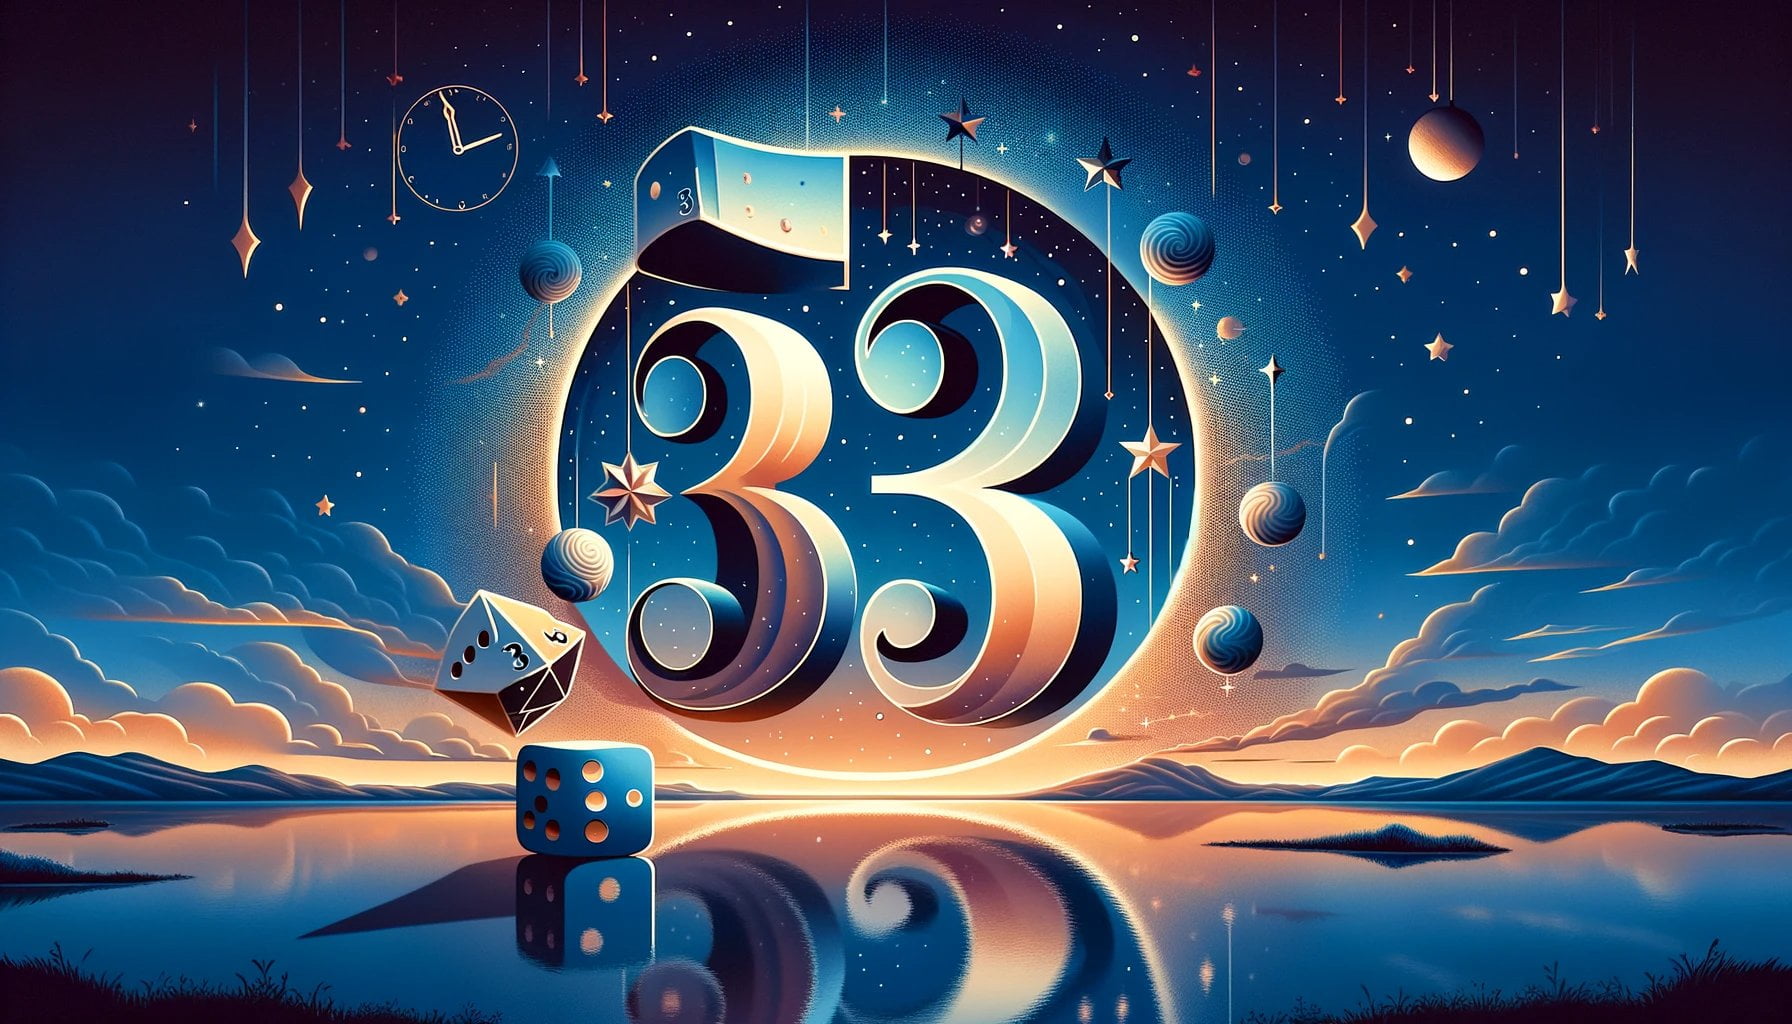 What is special about the number 33 